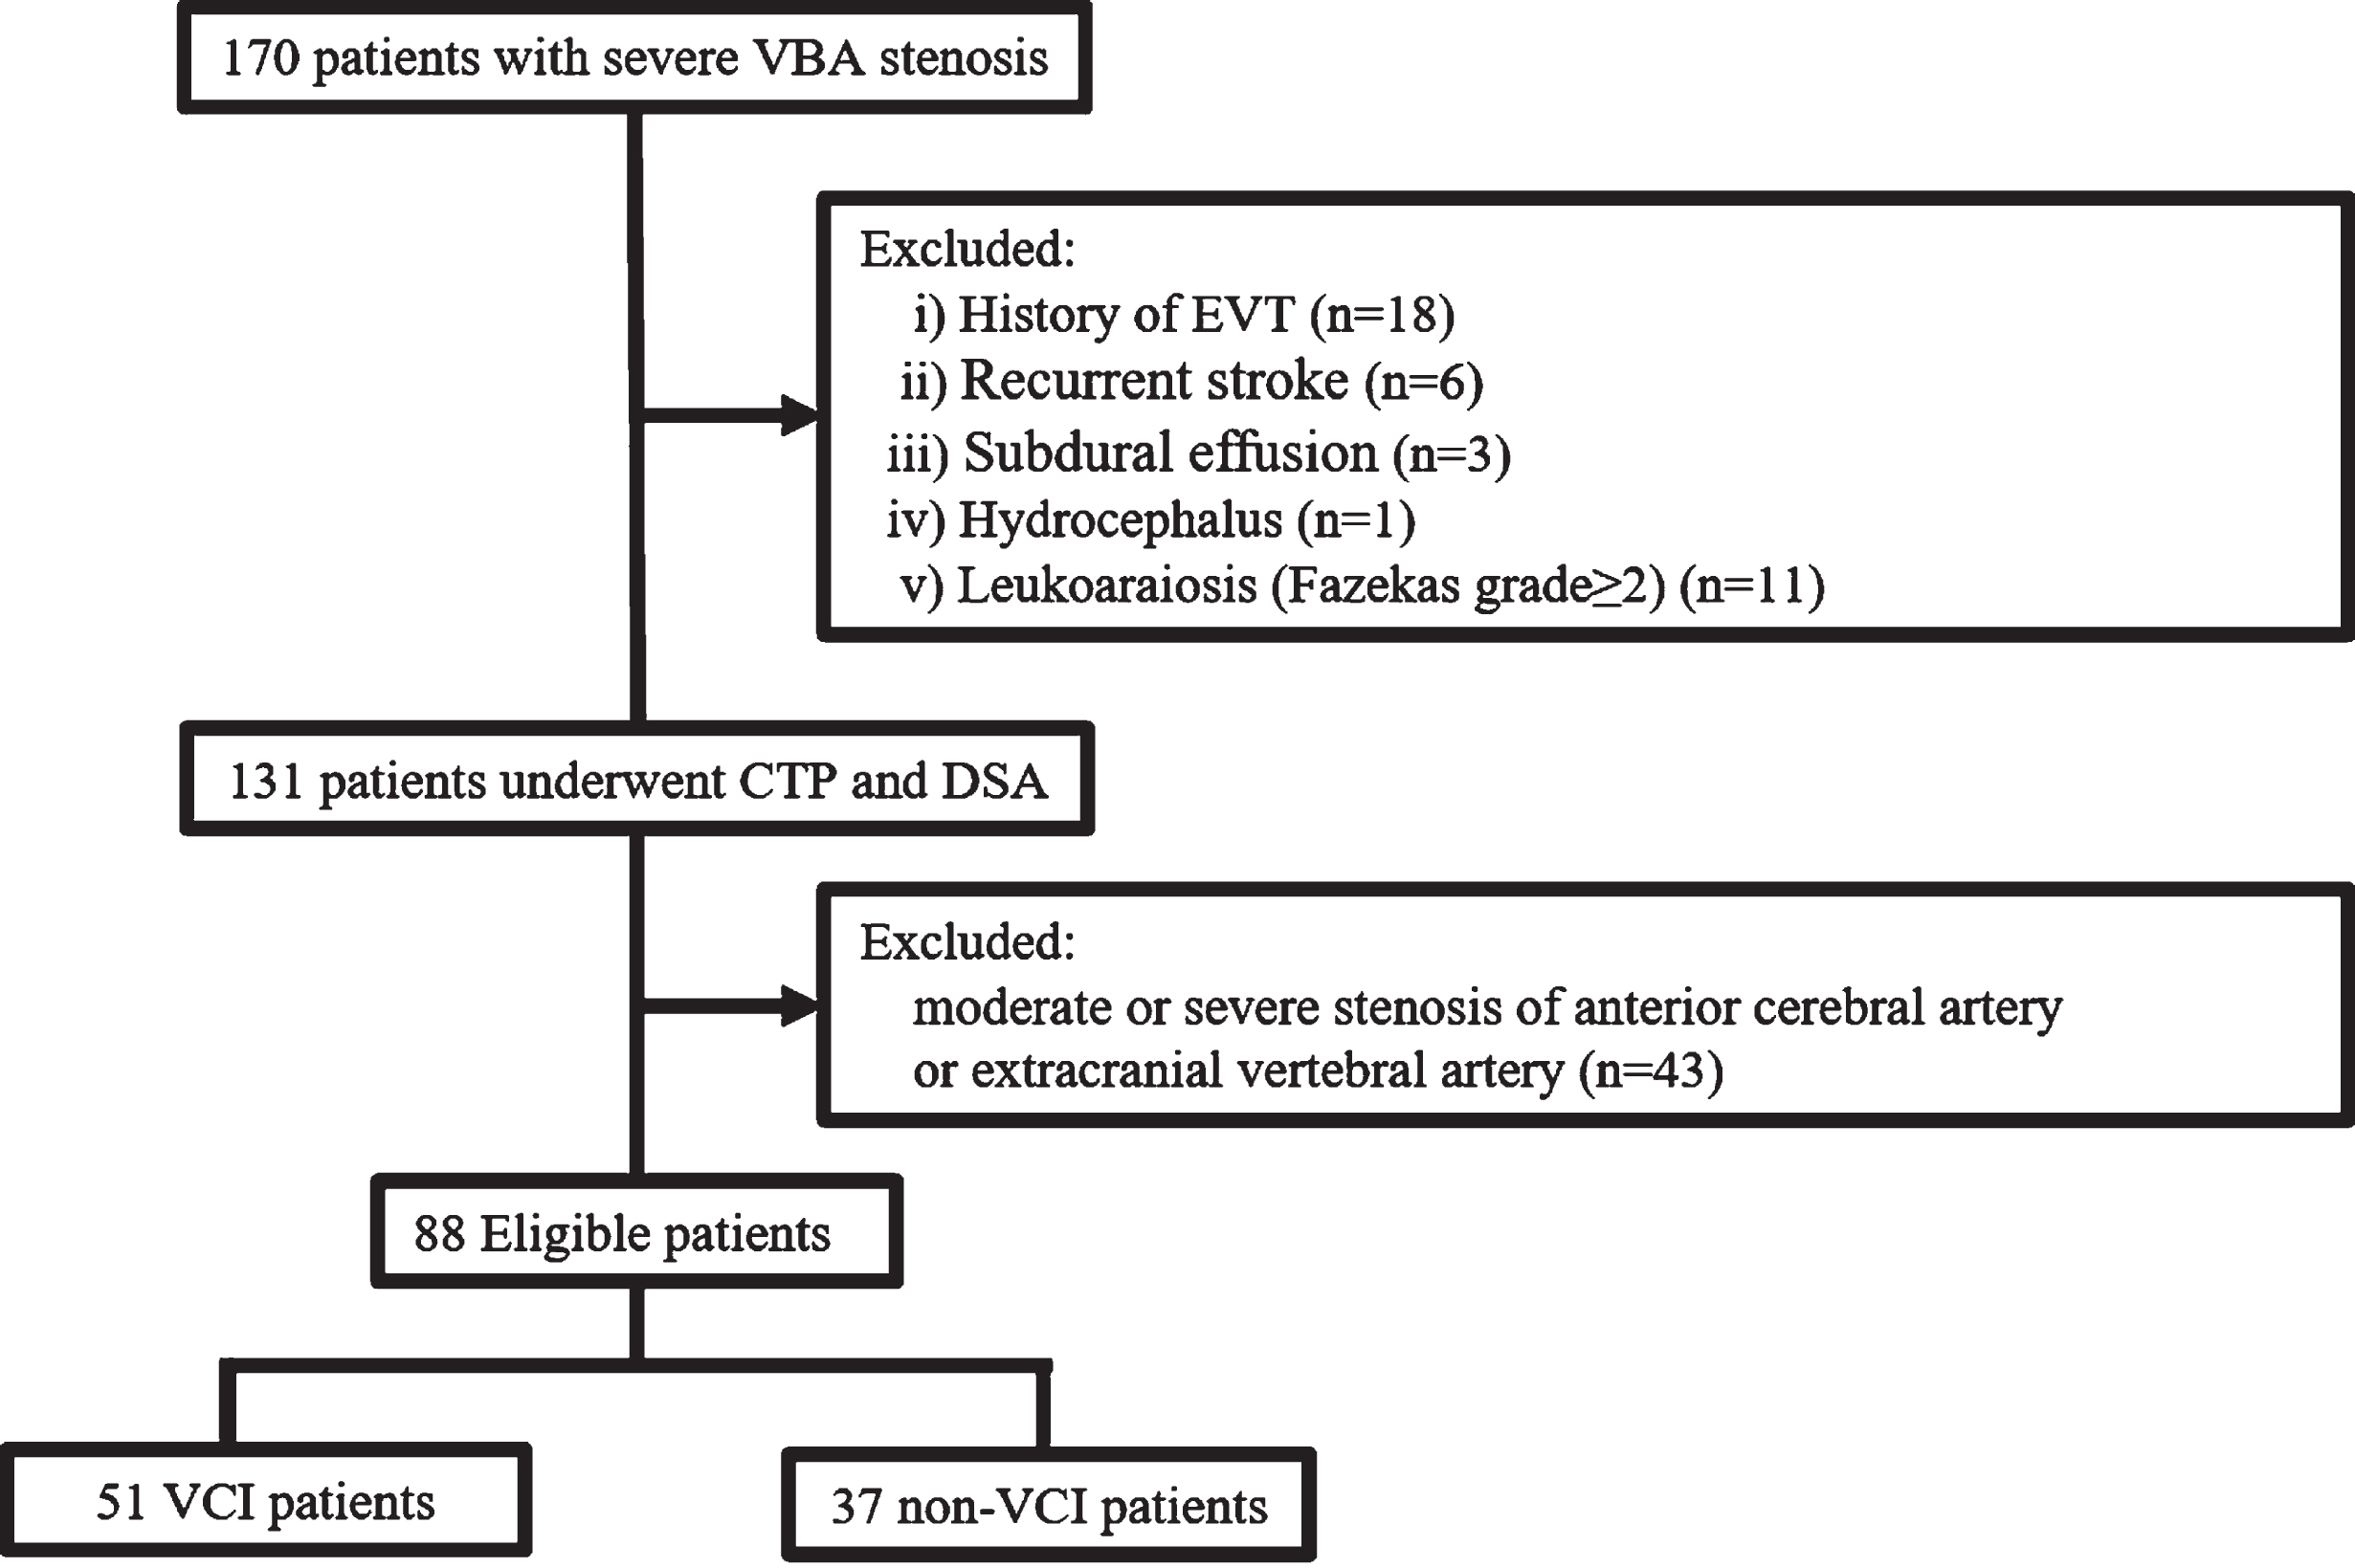 Flow chart for patient selection. VBA, vertebrobasilar artery; CTP, computed tomographic perfusion; DSA, digital subtraction angiography; EVT, endovascular interventional therapy.